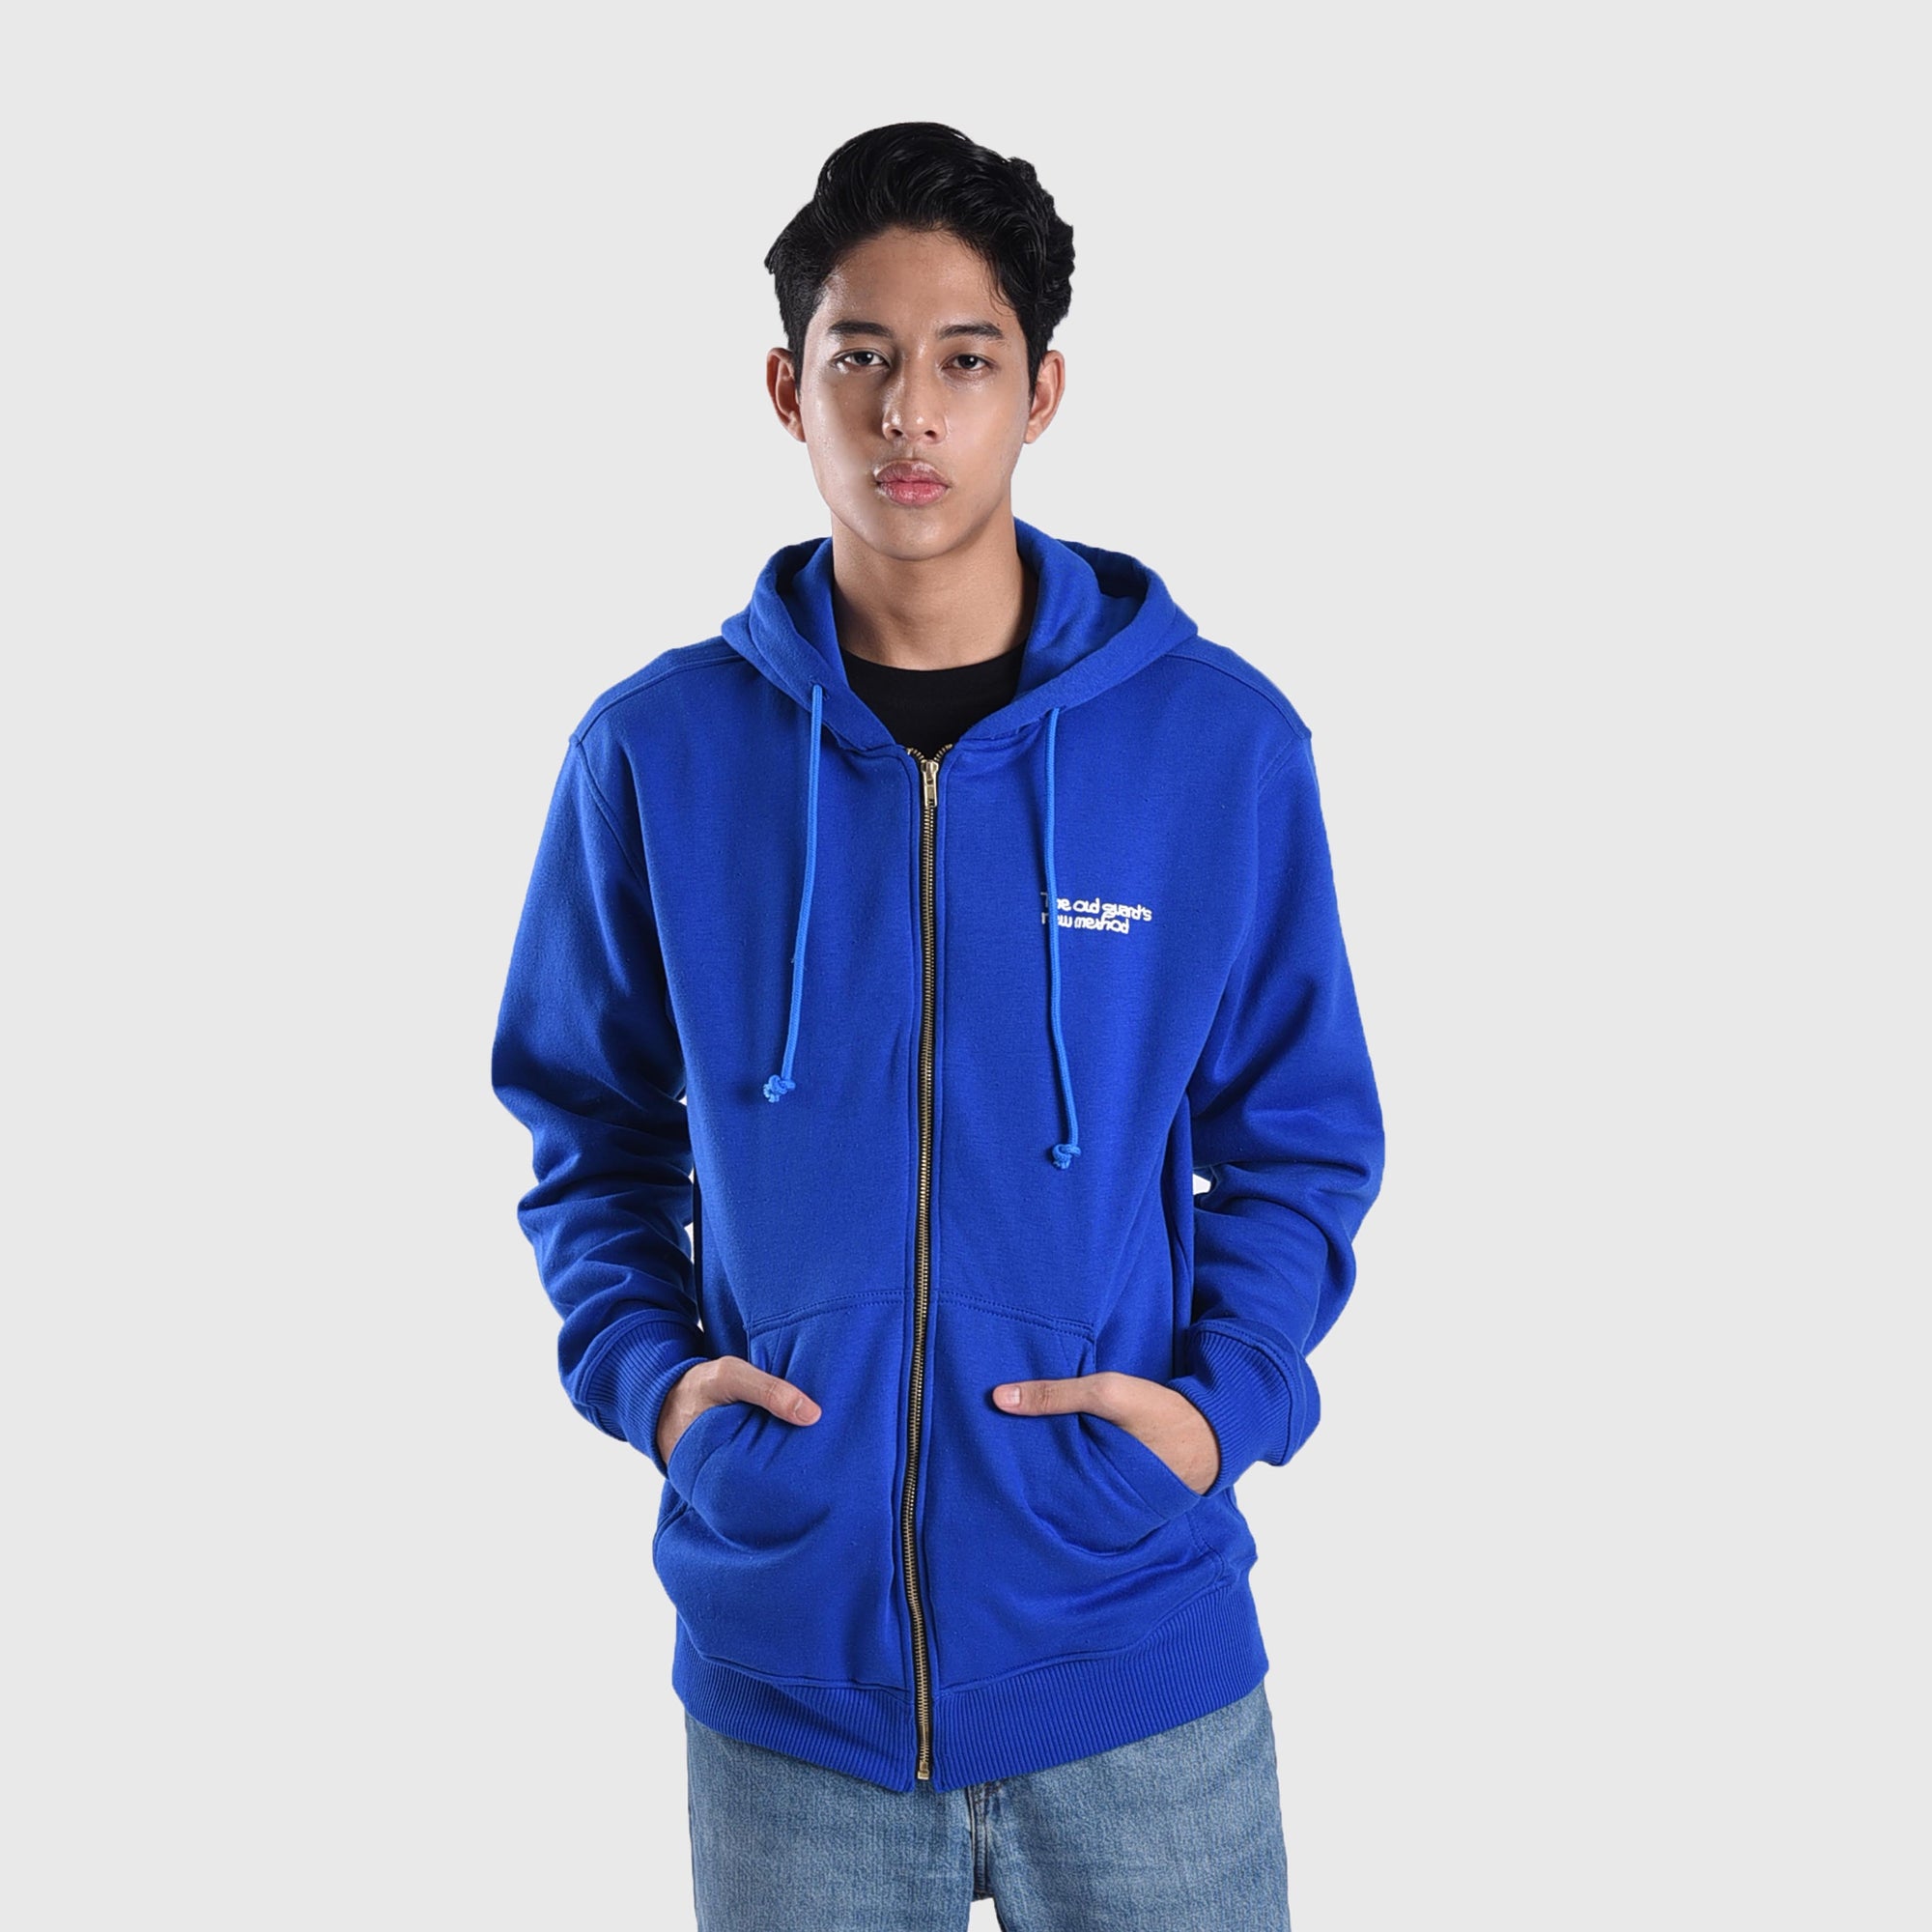 HZ055 Oxford Blue The Old Guards Zipper Hoodie